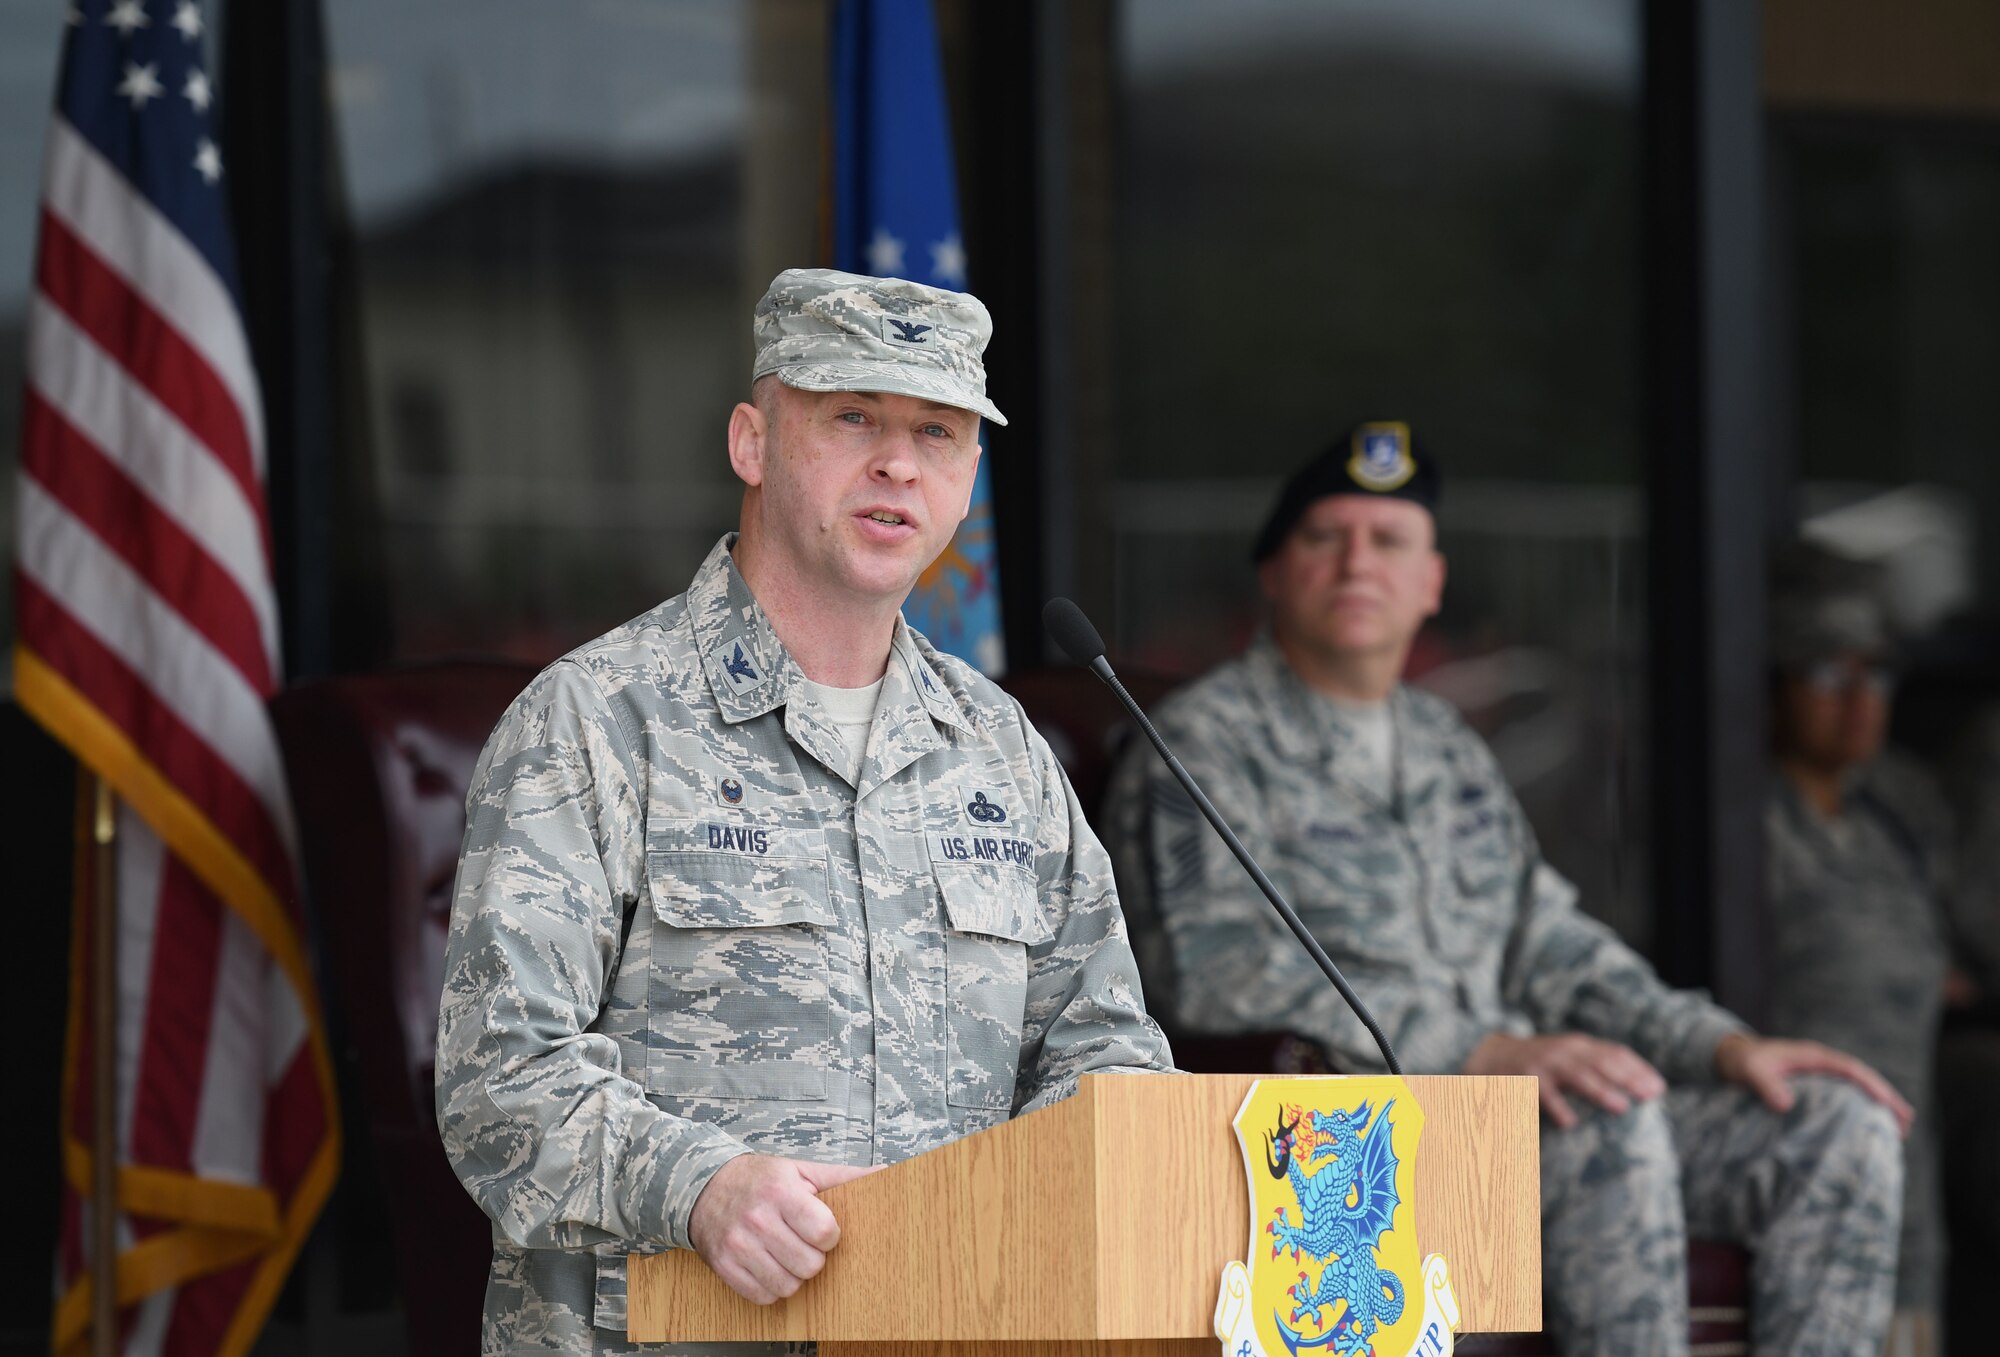 U.S. Air Force Col. Danny Davis, 81st Mission Support Group commander, delivers remarks during the 81st Training Group drill down on the Levitow Training Support Facility drill pad at Keesler Air Force Base, Mississippi, June 15, 2018. Airmen from the 81st TRG competed in a quarterly open ranks inspection, regulation drill routine and freestyle drill routine. (U.S. Air Force photo by Kemberly Groue)